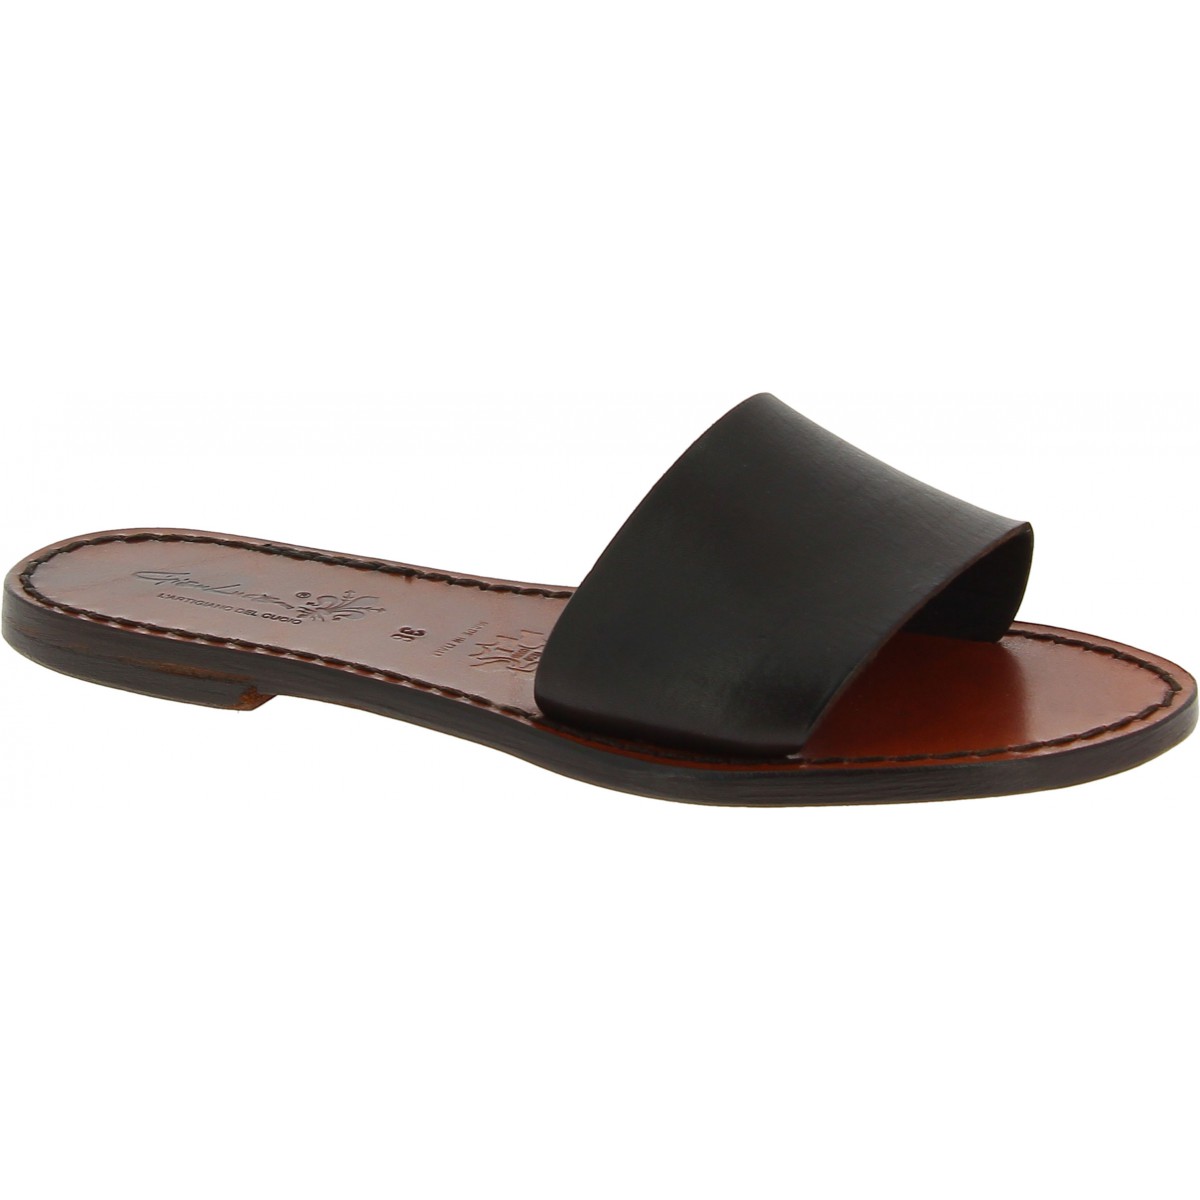 Women's leather slides sandals in dark brown leather handmade | The ...